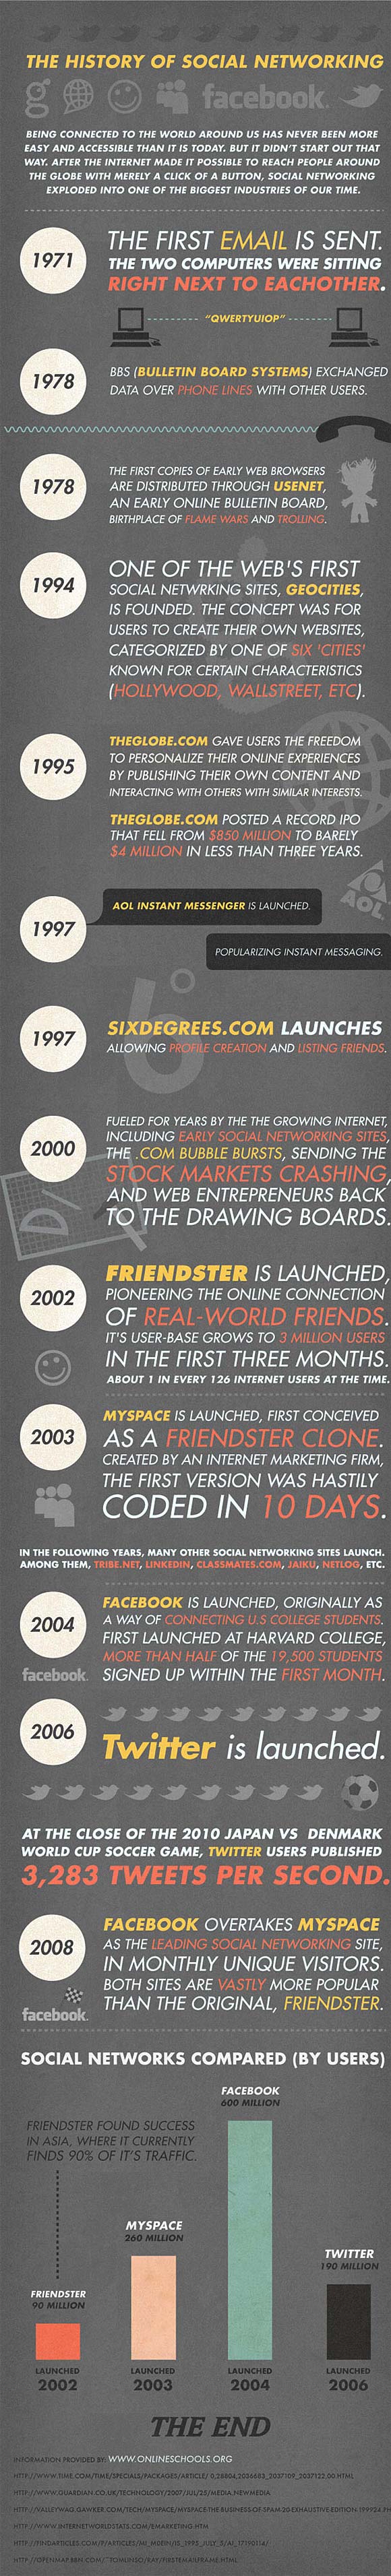 Social networking infographic: the rise of Facebook, the fall of Friendster